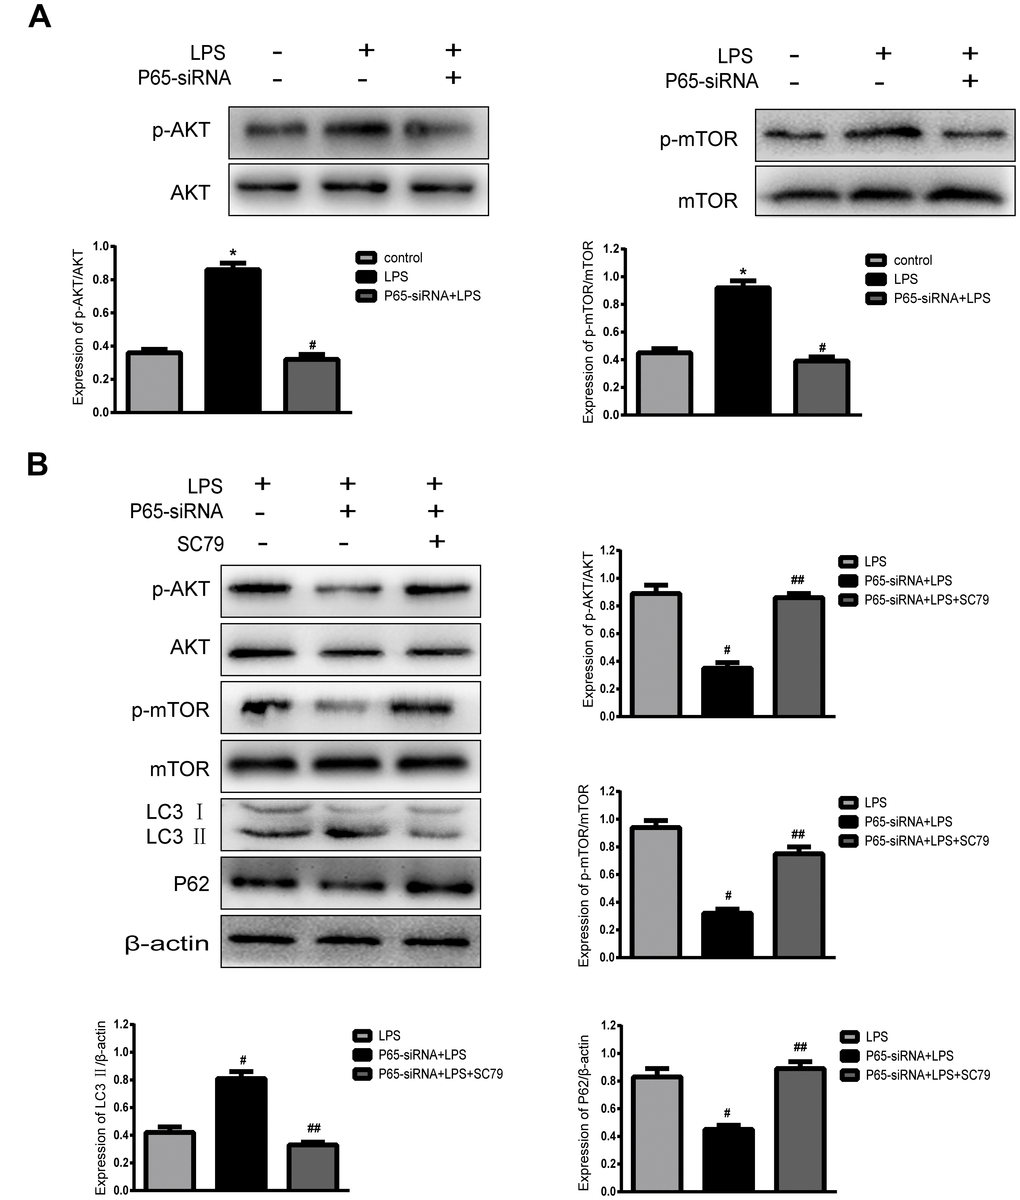 Inhibiting NF-κB promotes autophagy through AKT/mTOR pathway. (A) Western blot for the protein level of p-AKT, AKT, p-mTOR and mTOR. (B) After the addition of an AKT activator (SC79), Western blot for the protein level of p-AKT, AKT, p-mTOR, mTOR, LC3 and P62. Values are means ±SEM.*p#p##p